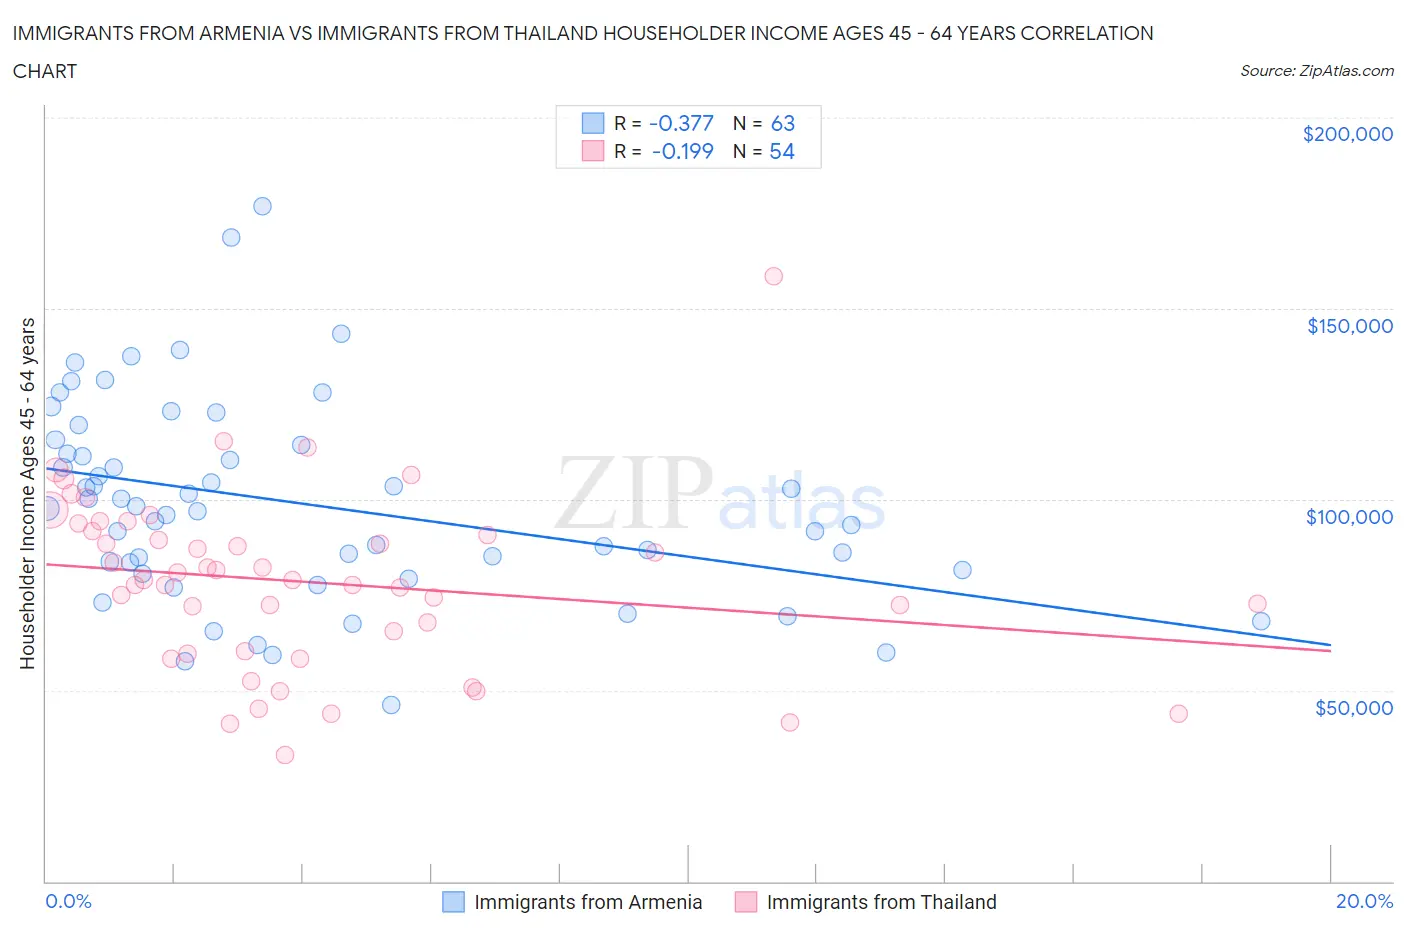 Immigrants from Armenia vs Immigrants from Thailand Householder Income Ages 45 - 64 years